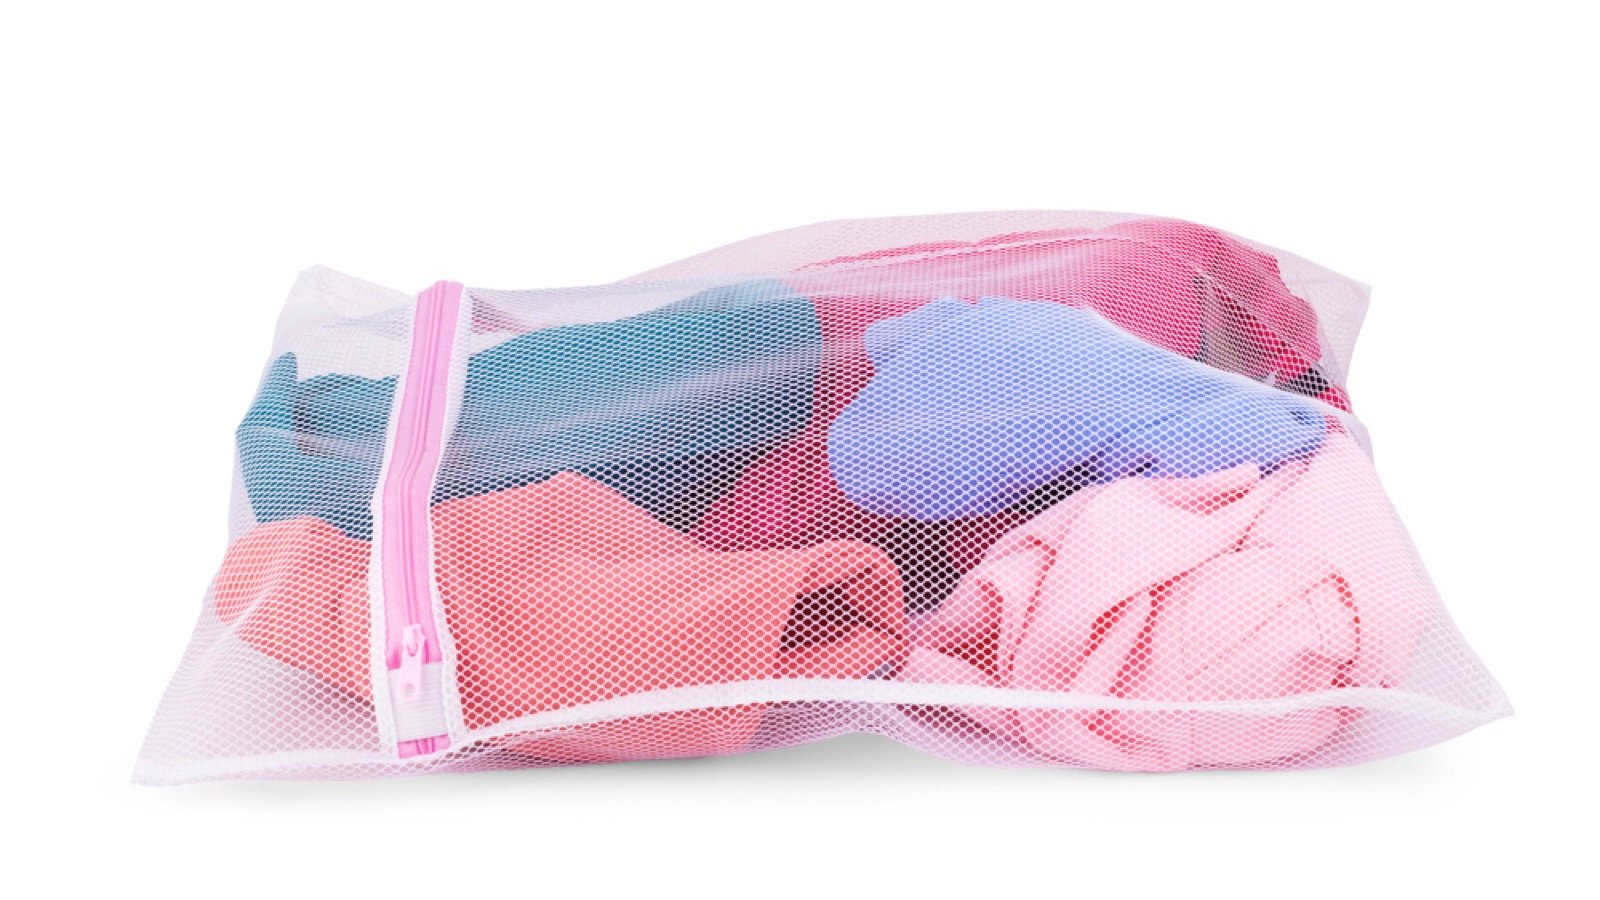 <p>While reusable plastic bags are a quick and easy solution to hold dirty clothes in, the plastic not only holds the scent in but may make it even stronger. To avoid this, use a zippered, reusable cloth bag instead. If you can find one that’s waterproof inside, even better. Cloth bags are also a more sustainable option than plastic bags.</p><p>Source: <a href="https://www.reddit.com/r/HerOneBag/comments/17b6y18/lets_talk_dirty_clothes/">Reddit</a>.</p>